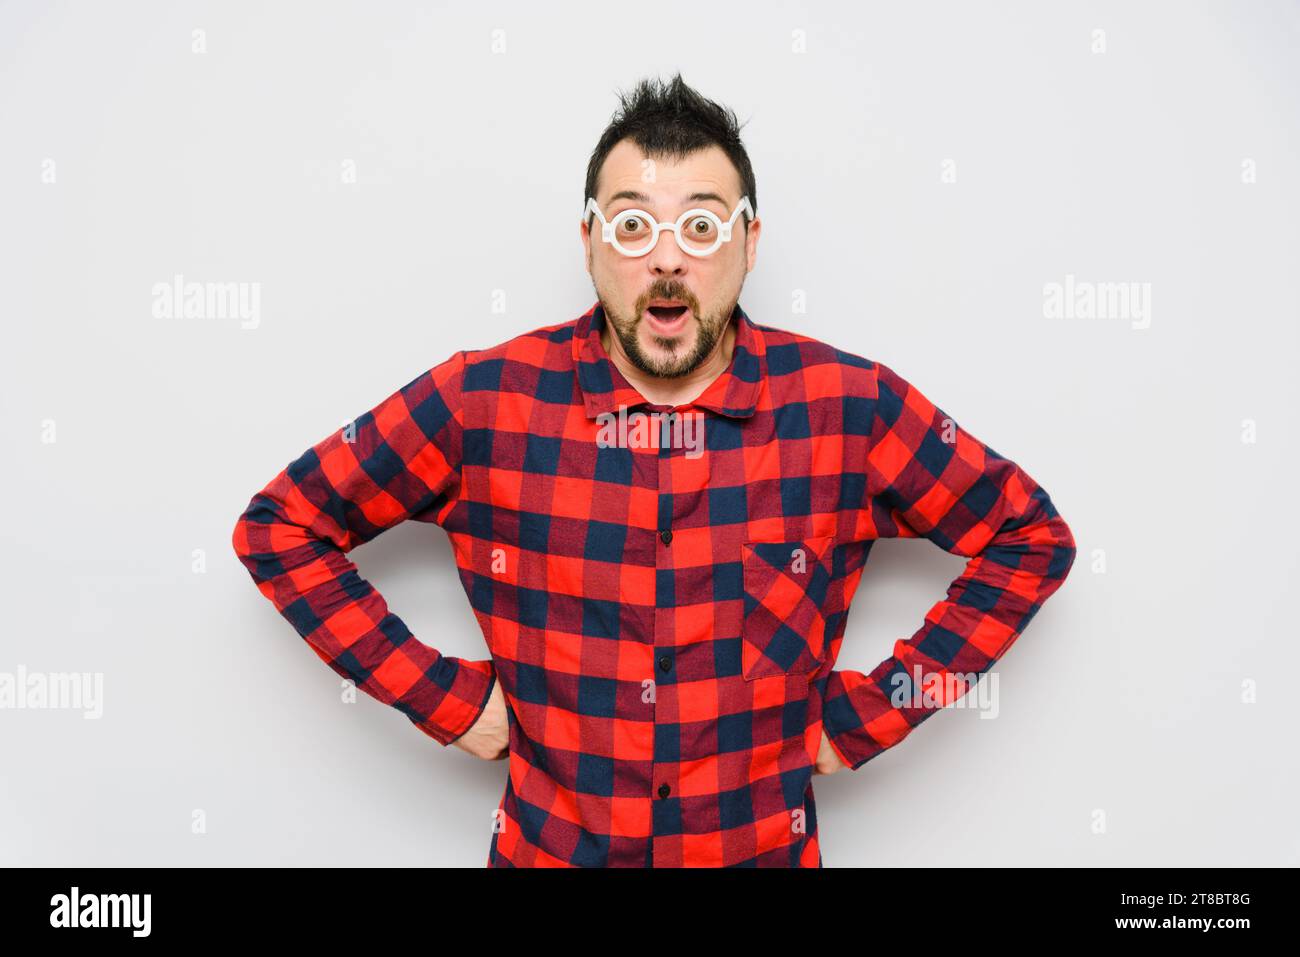 Wow, Incredible! Funny Amazed Shocked Surprised Portrait Man with Glasses with Mouth Open. Man on a light background is wearing a red checkered shirt Stock Photo